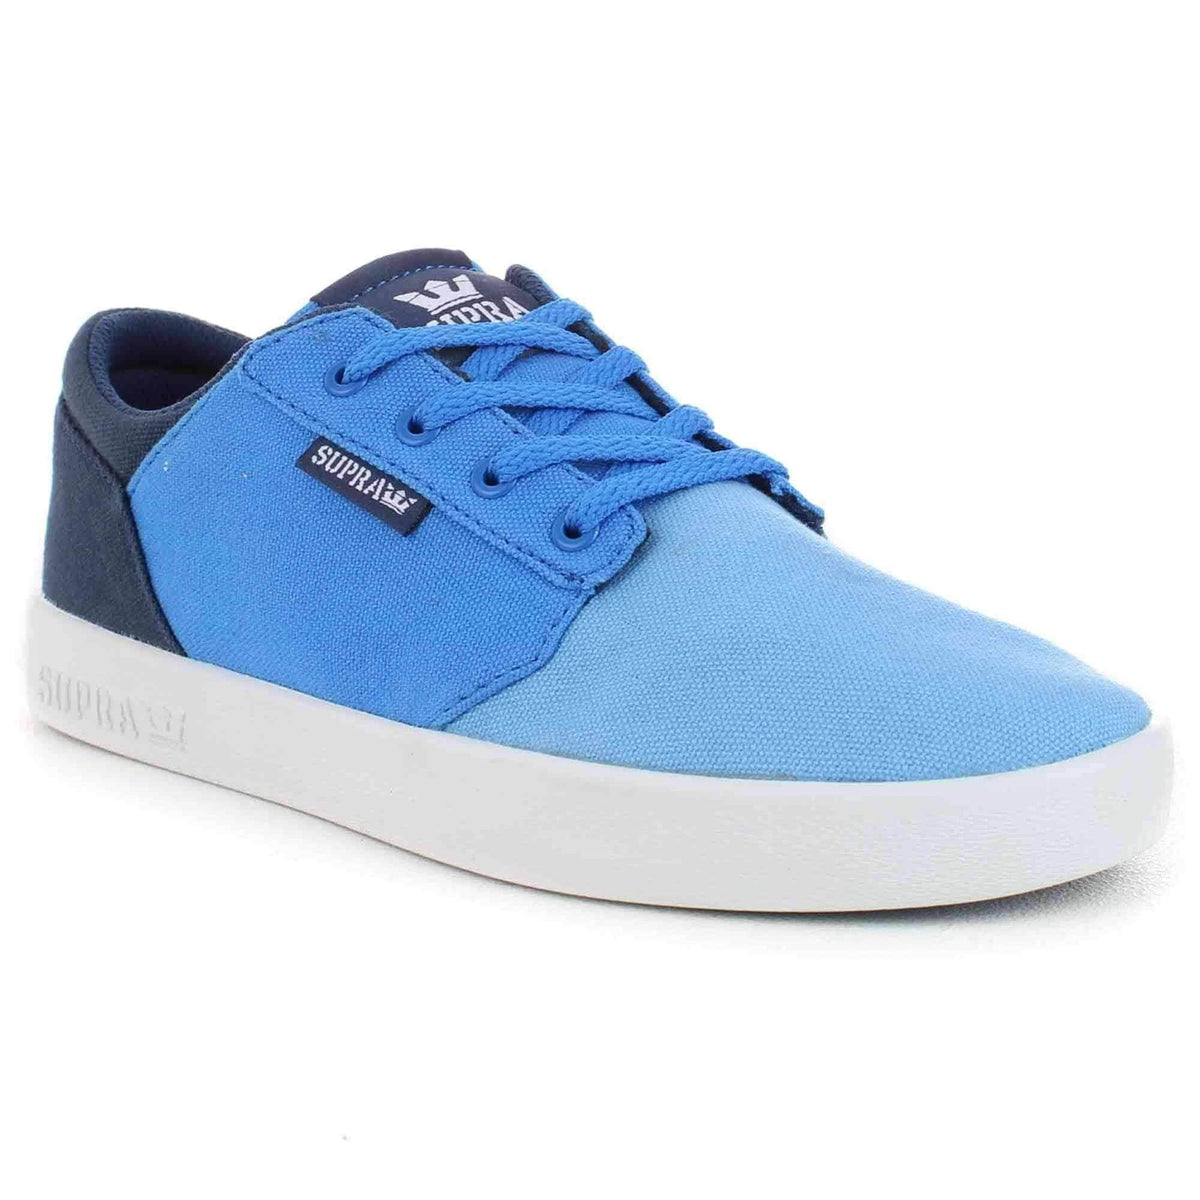 Supra Youths Yorek Low Shoes in Blue Fade White - Boys Skate Shoes by Supra